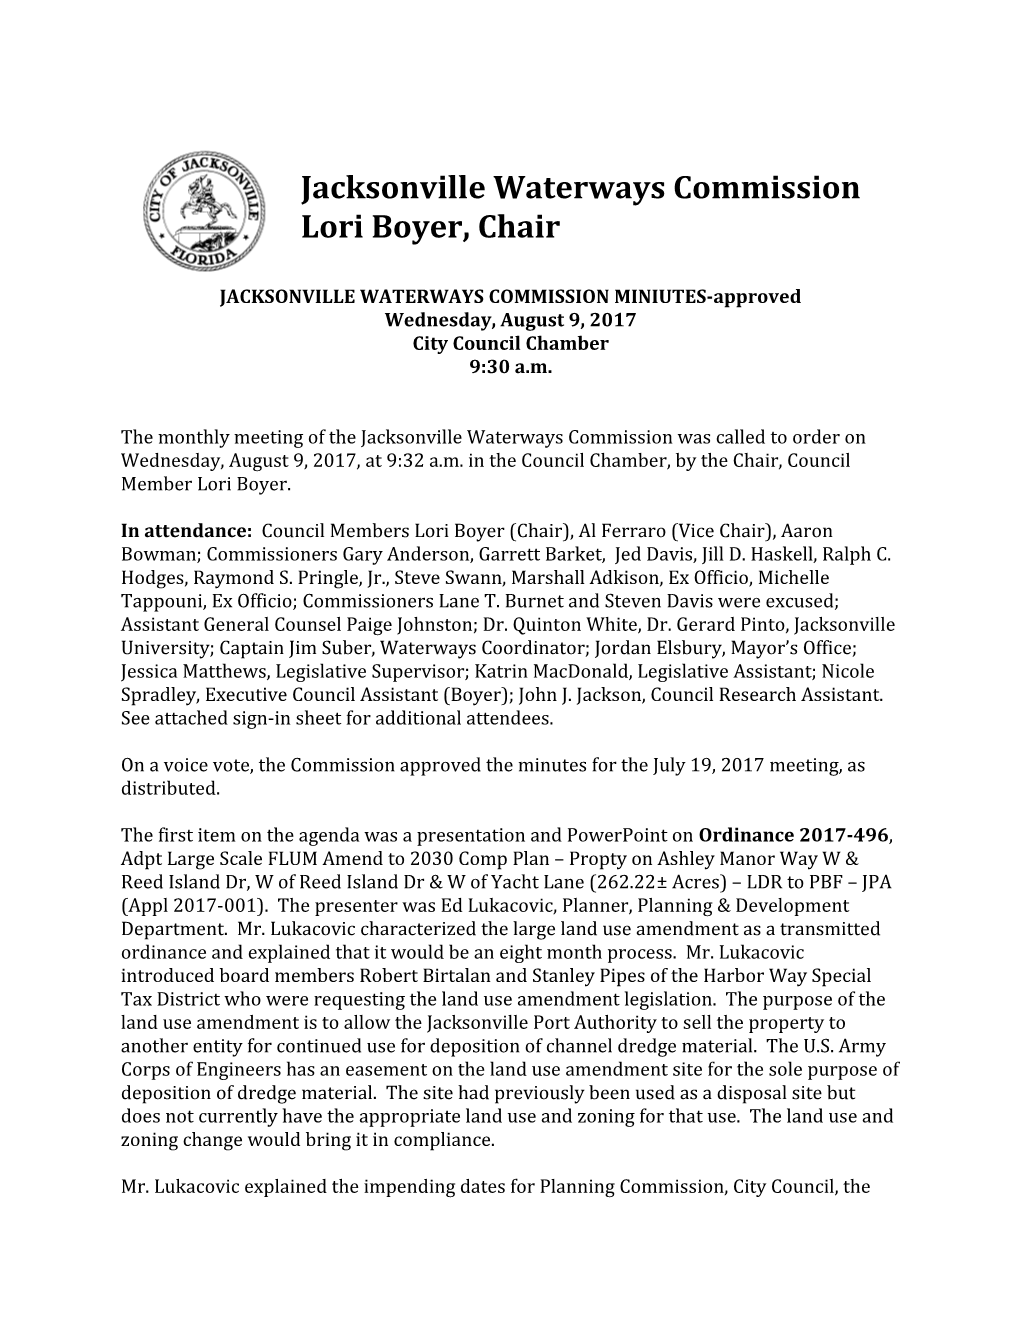 JACKSONVILLE WATERWAYS COMMISSION MINIUTES-Approved